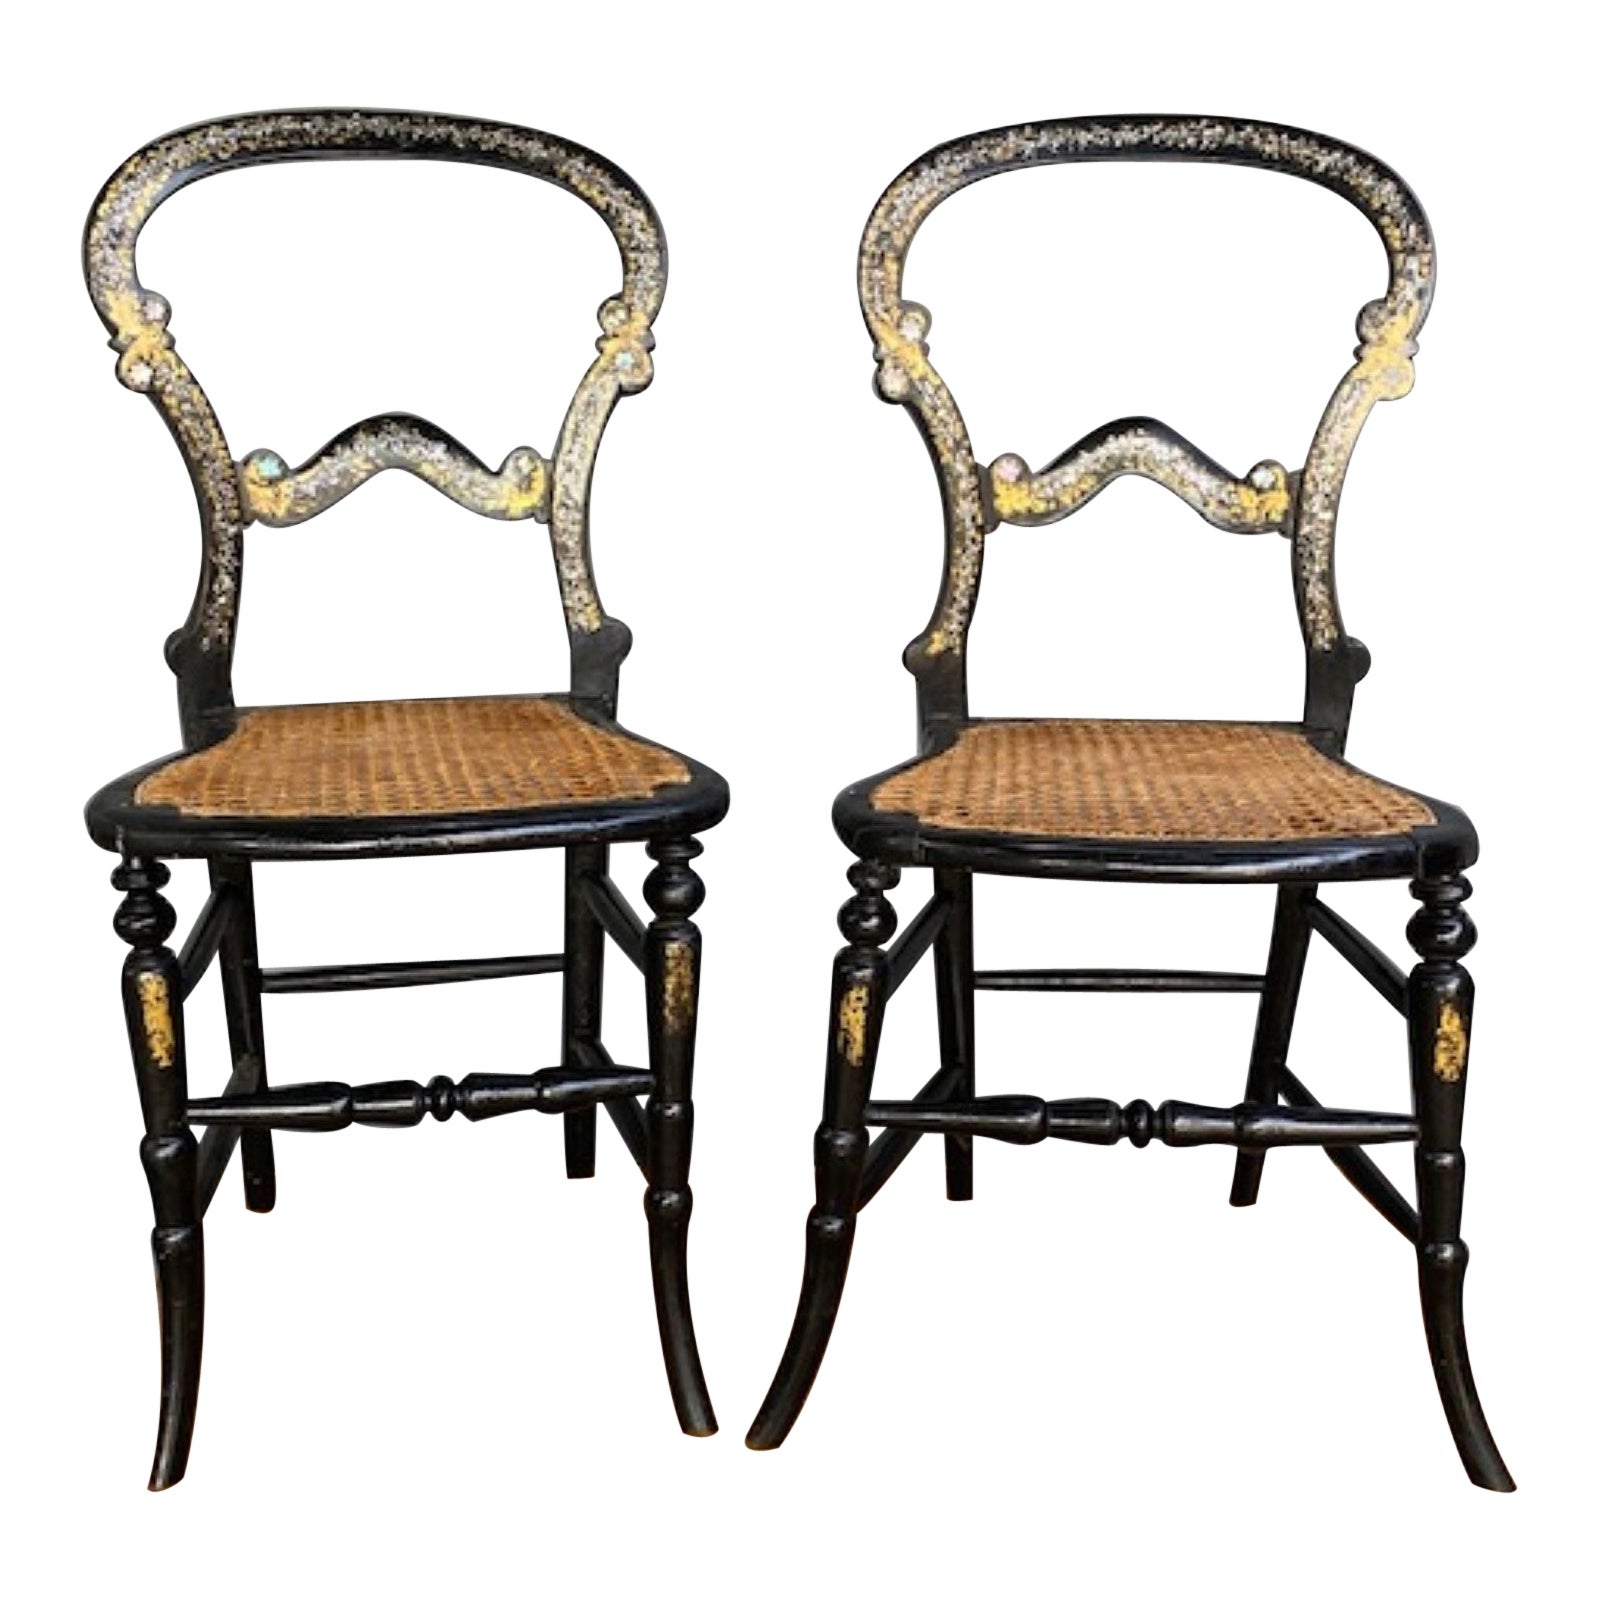 Pair of 19th Century. Antique English Victorian Ebonised Side Chairs, Circa 1860 For Sale